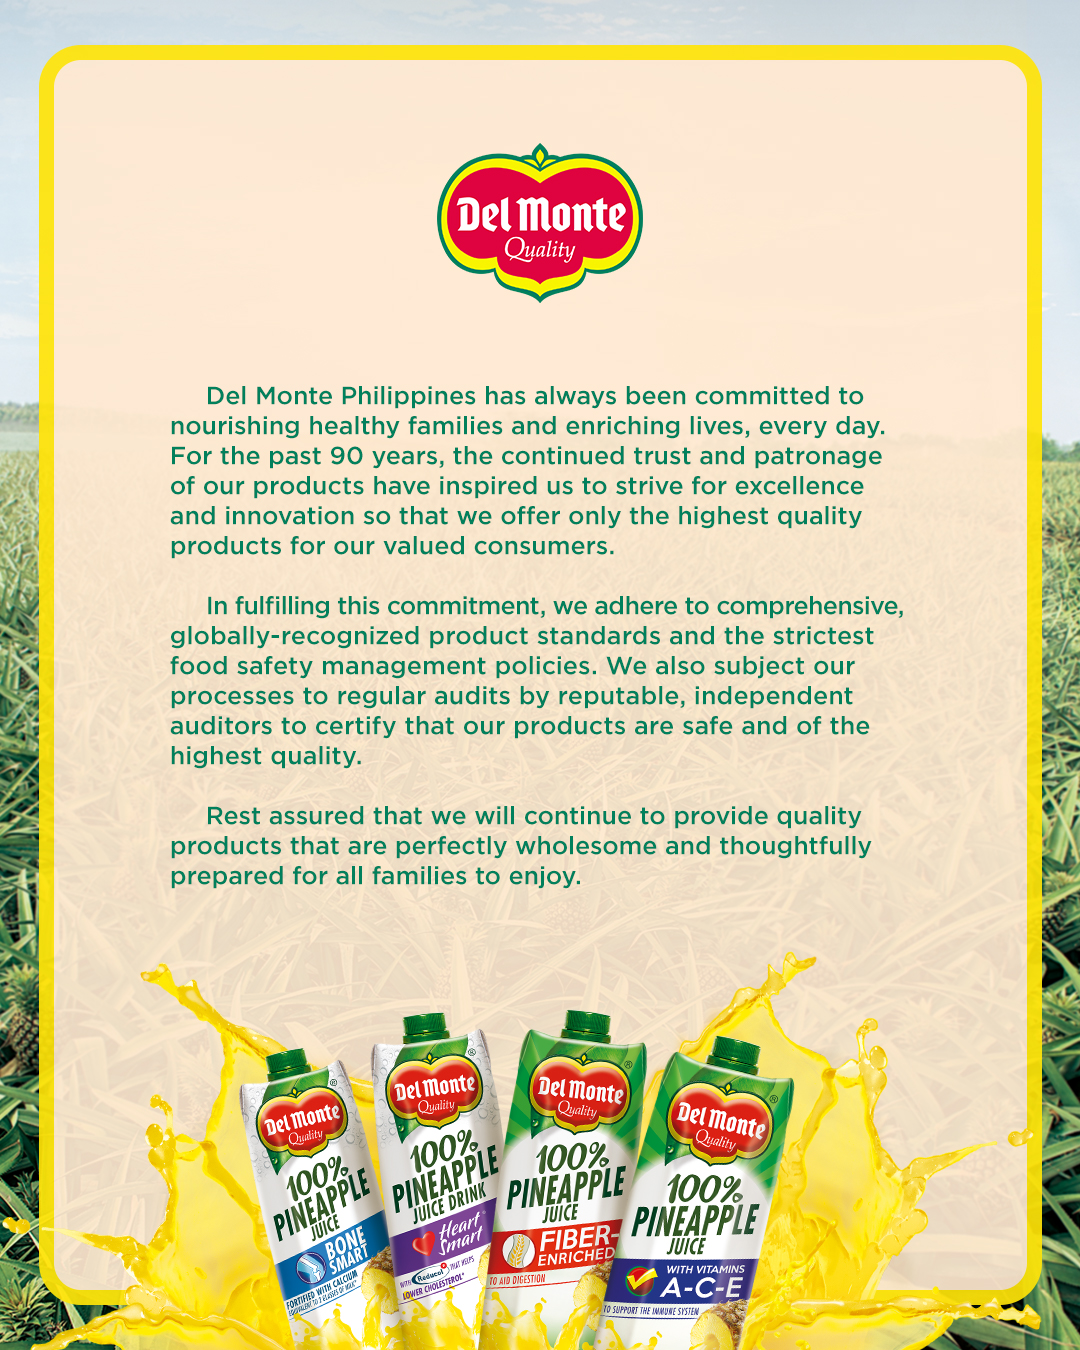 Del Monte Philippines has always been committed to nourishing healthy families and enriching lives, every day. For the past 90 years, the continued trust and patronage of our products have inspired us to strive for excellence and innovation so that we offer only the highest quality products for our valued consumers. In fulfilling this commitment, we adhere to comprehensive, globally-recognized product standards and strictest food safety management policies. We also subject our processes to regular audits by reputable, independent auditors to certify that our product are safe and of the highest quality. Rest assured that we will continue to provide quality products that are perfectly wholesome and thoughtfully prepared for all families to enjoy.